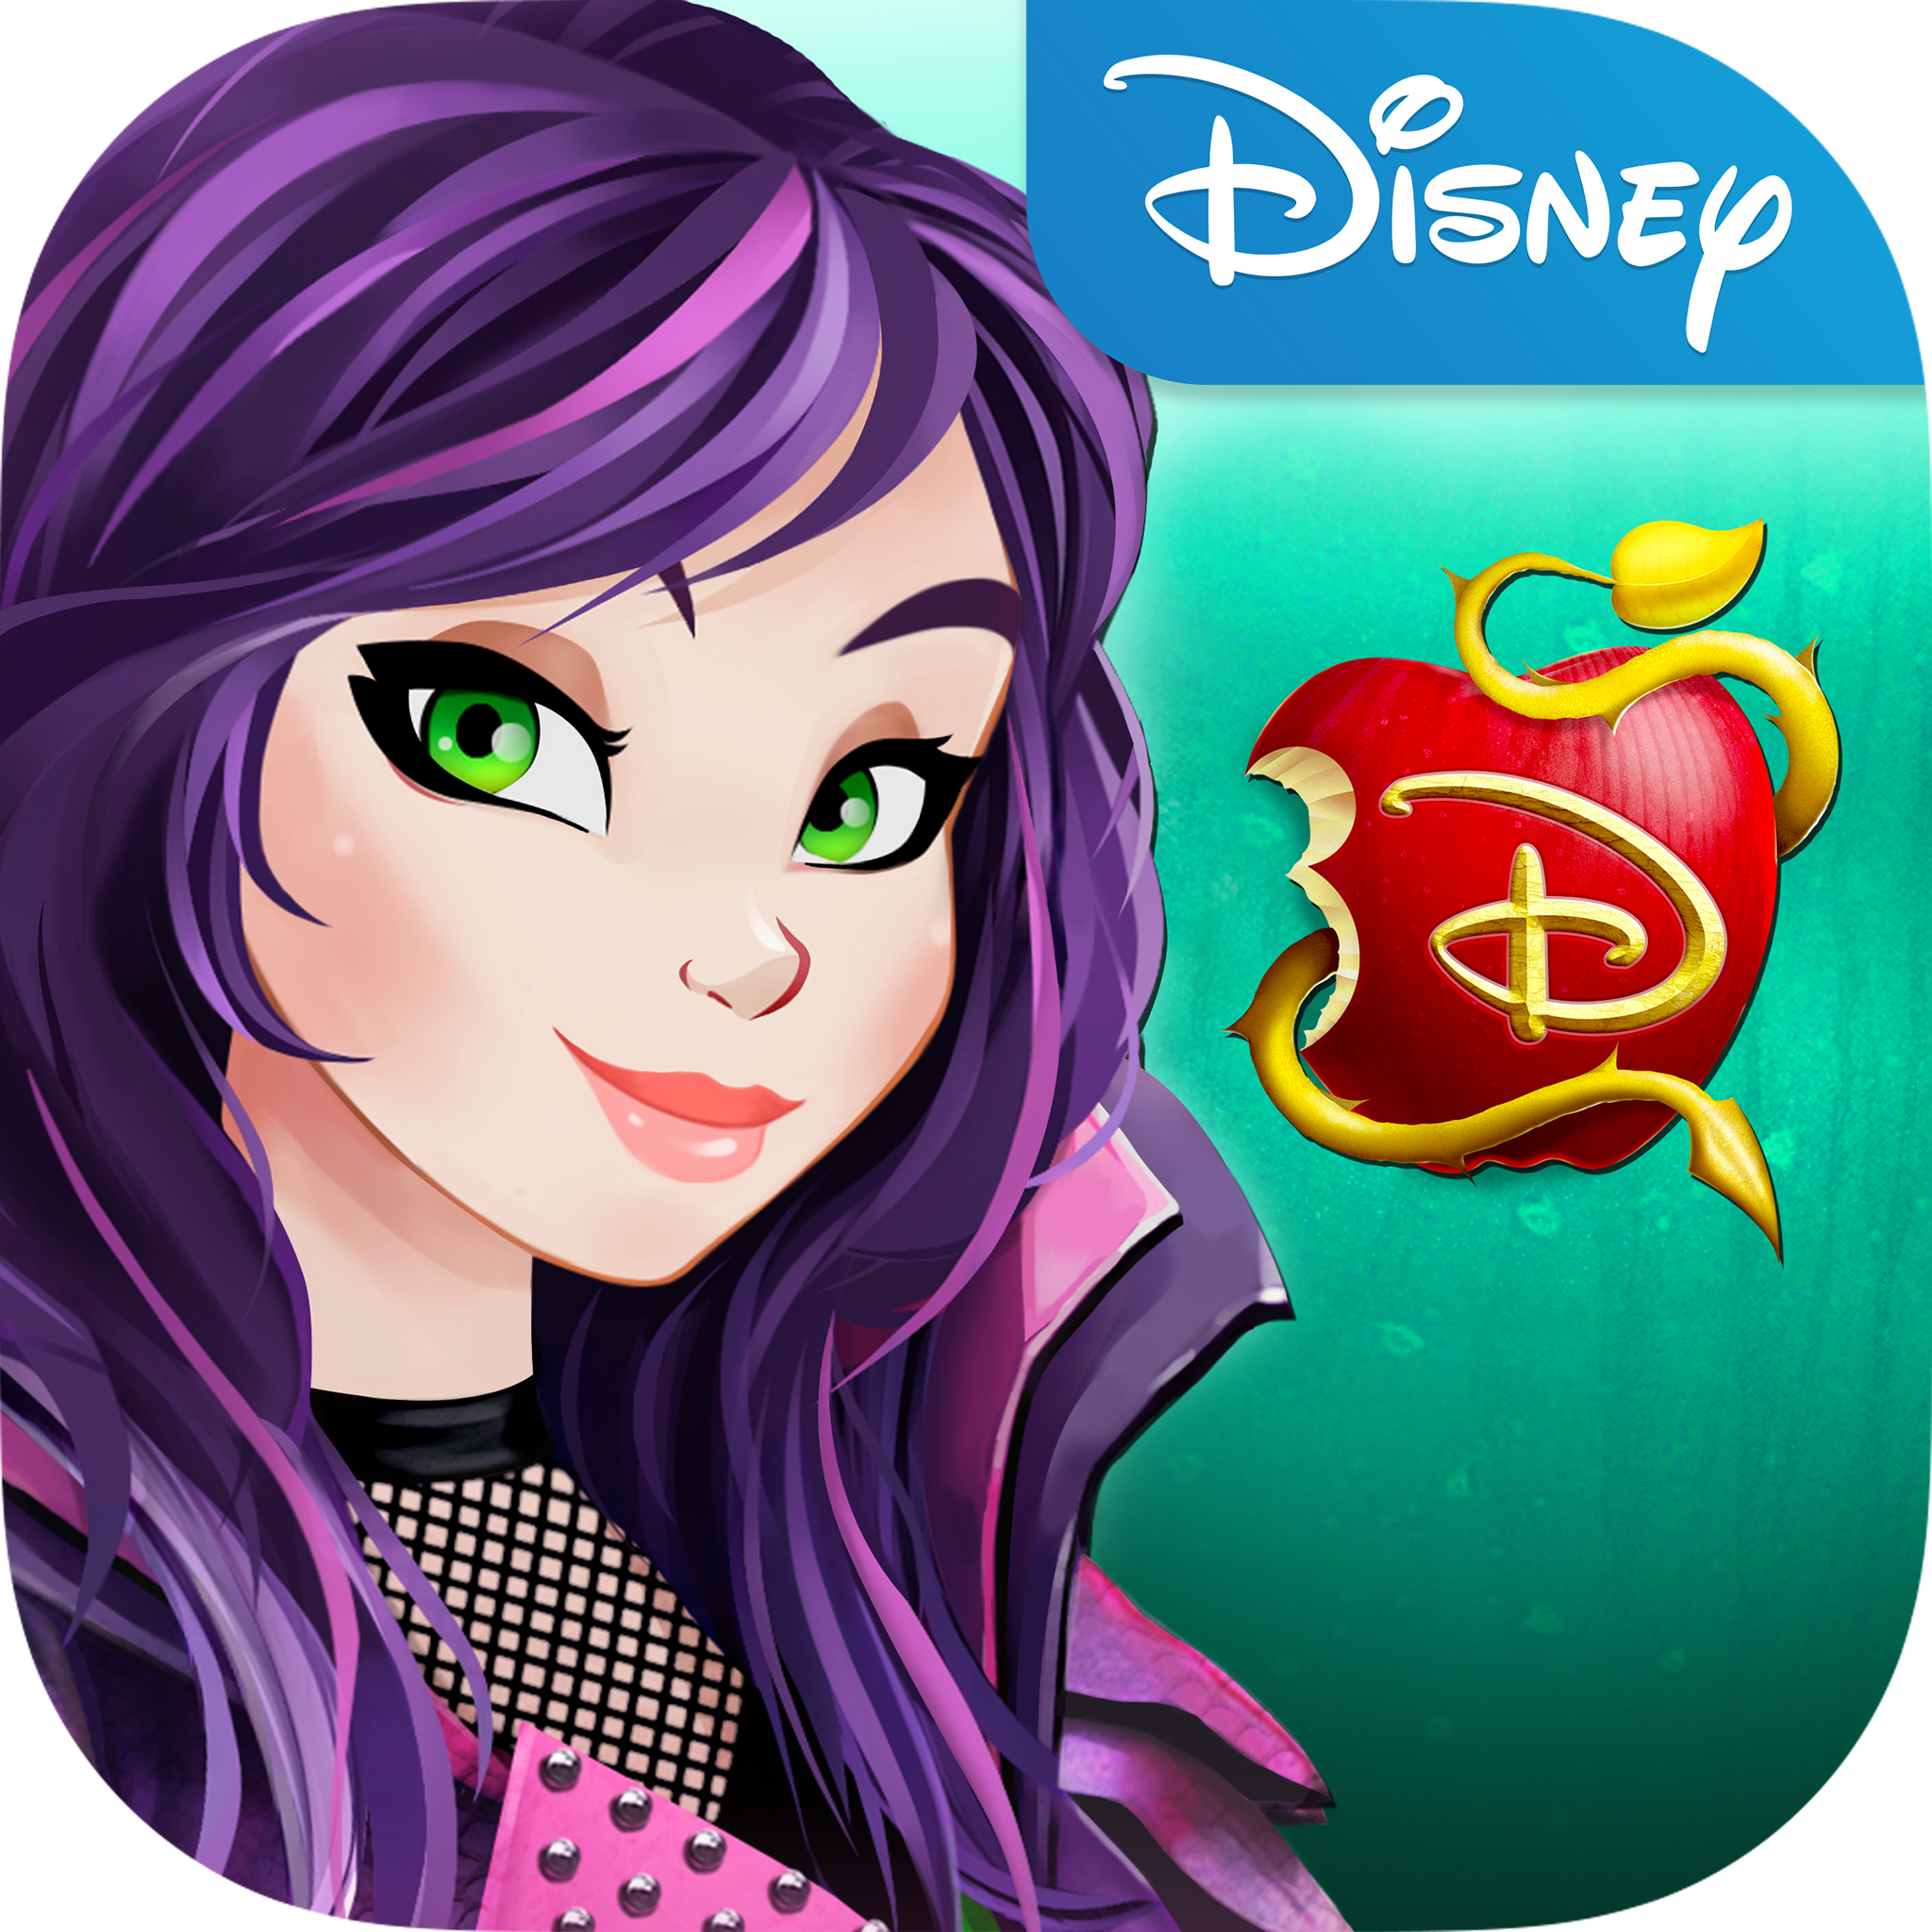 Disney.com | The official home for all things Disney2048 x 2048